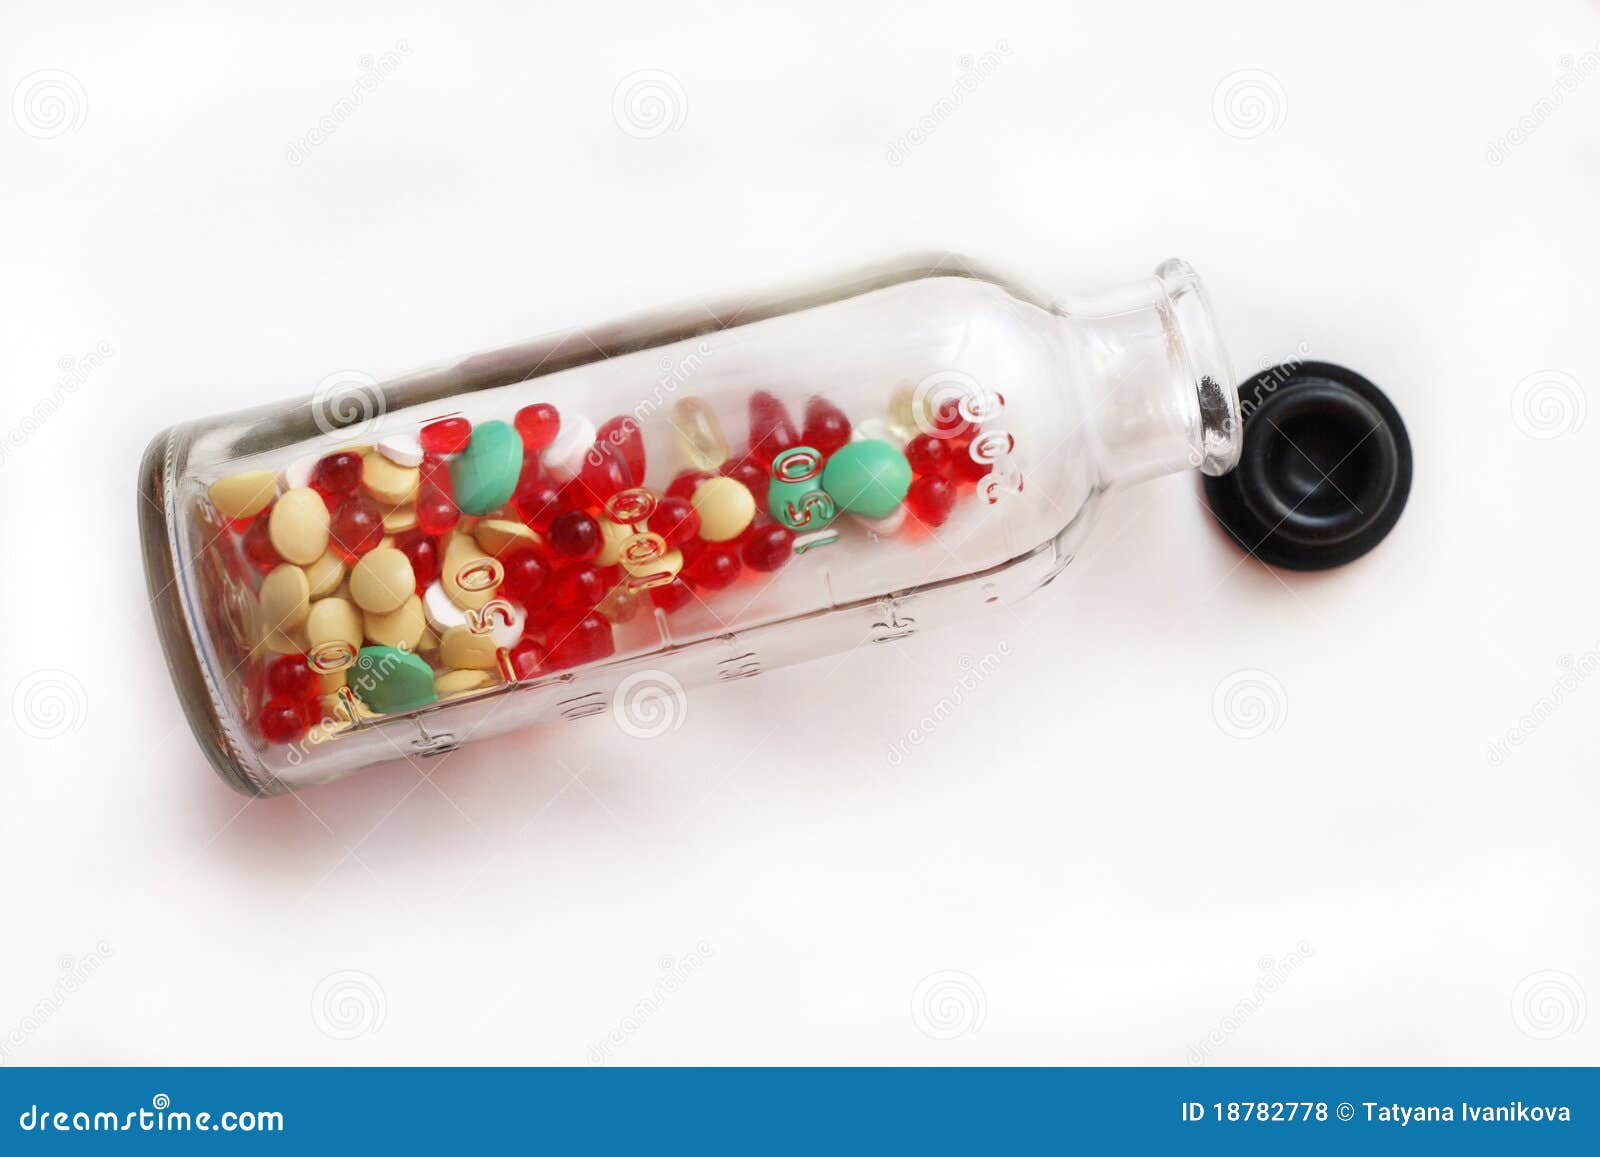 Vitamins in a small bottle